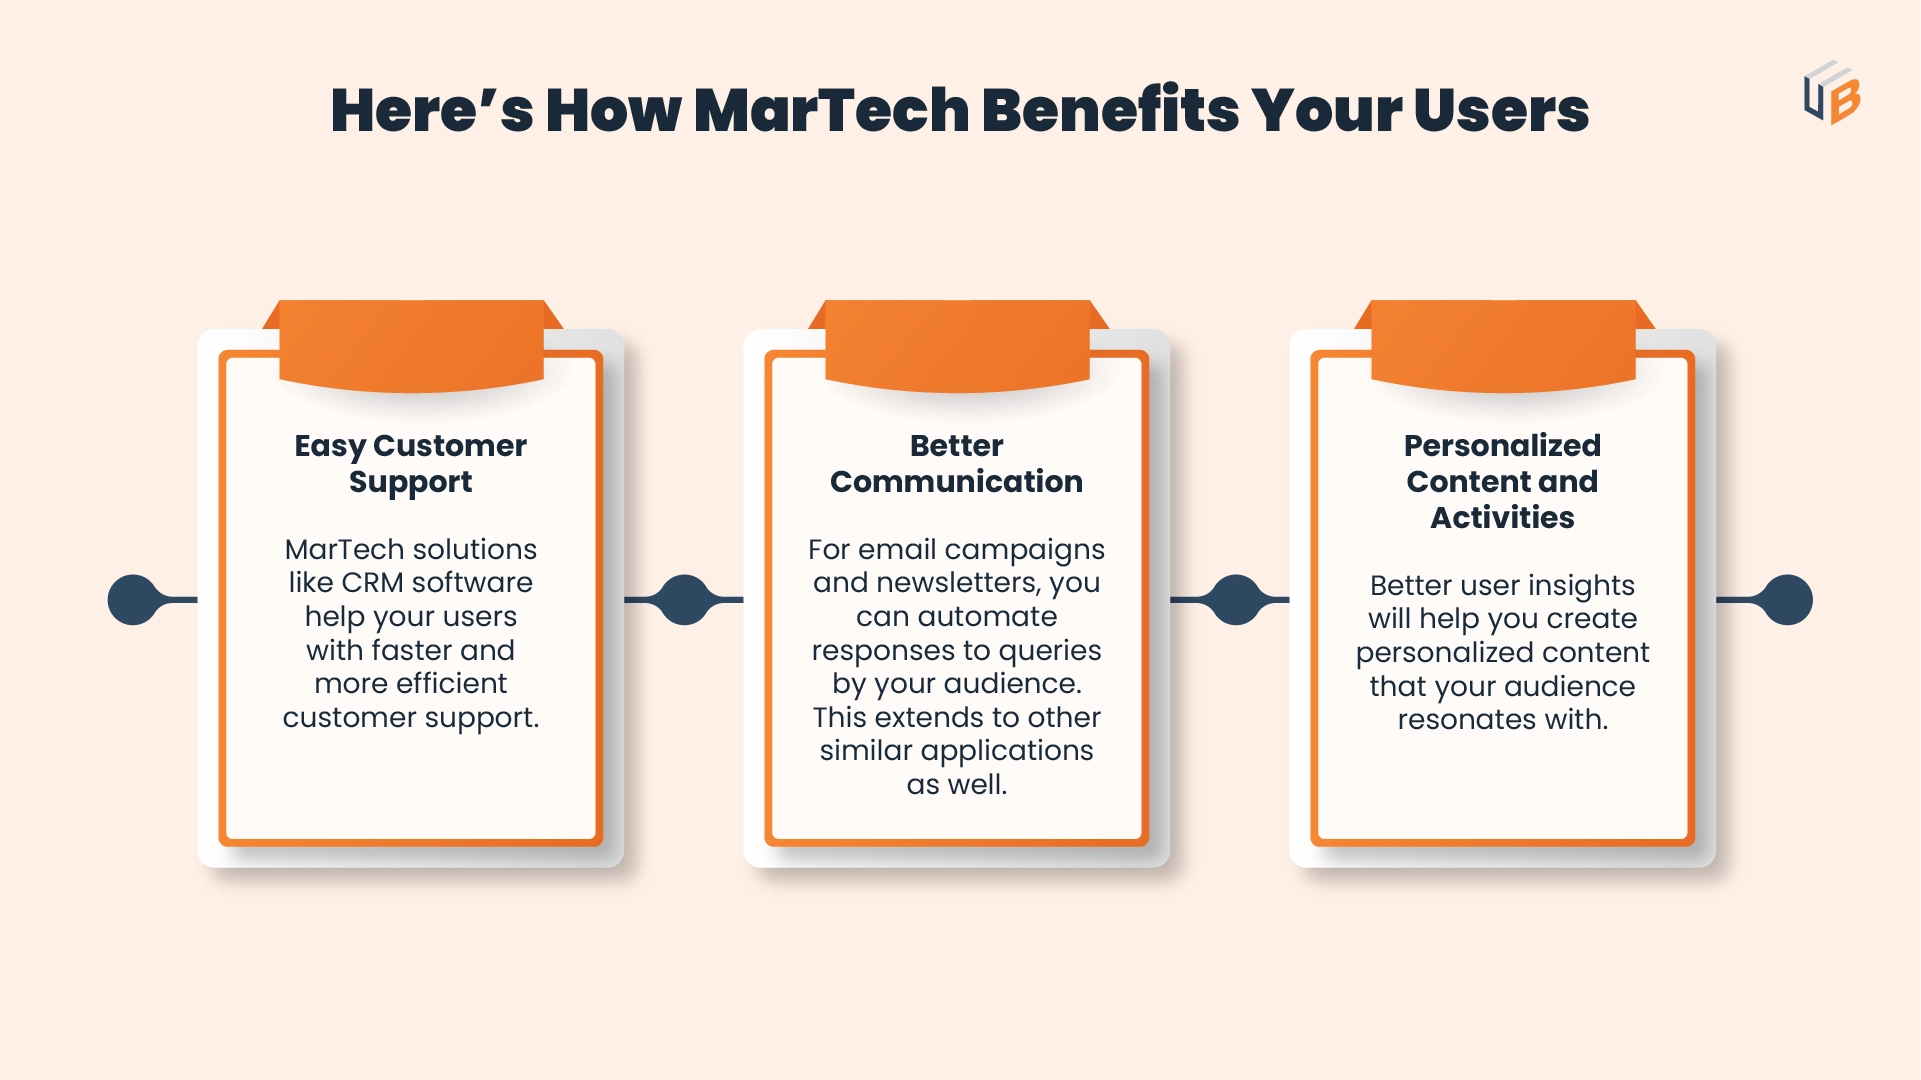 Here's How MarTech Benefits Your Users